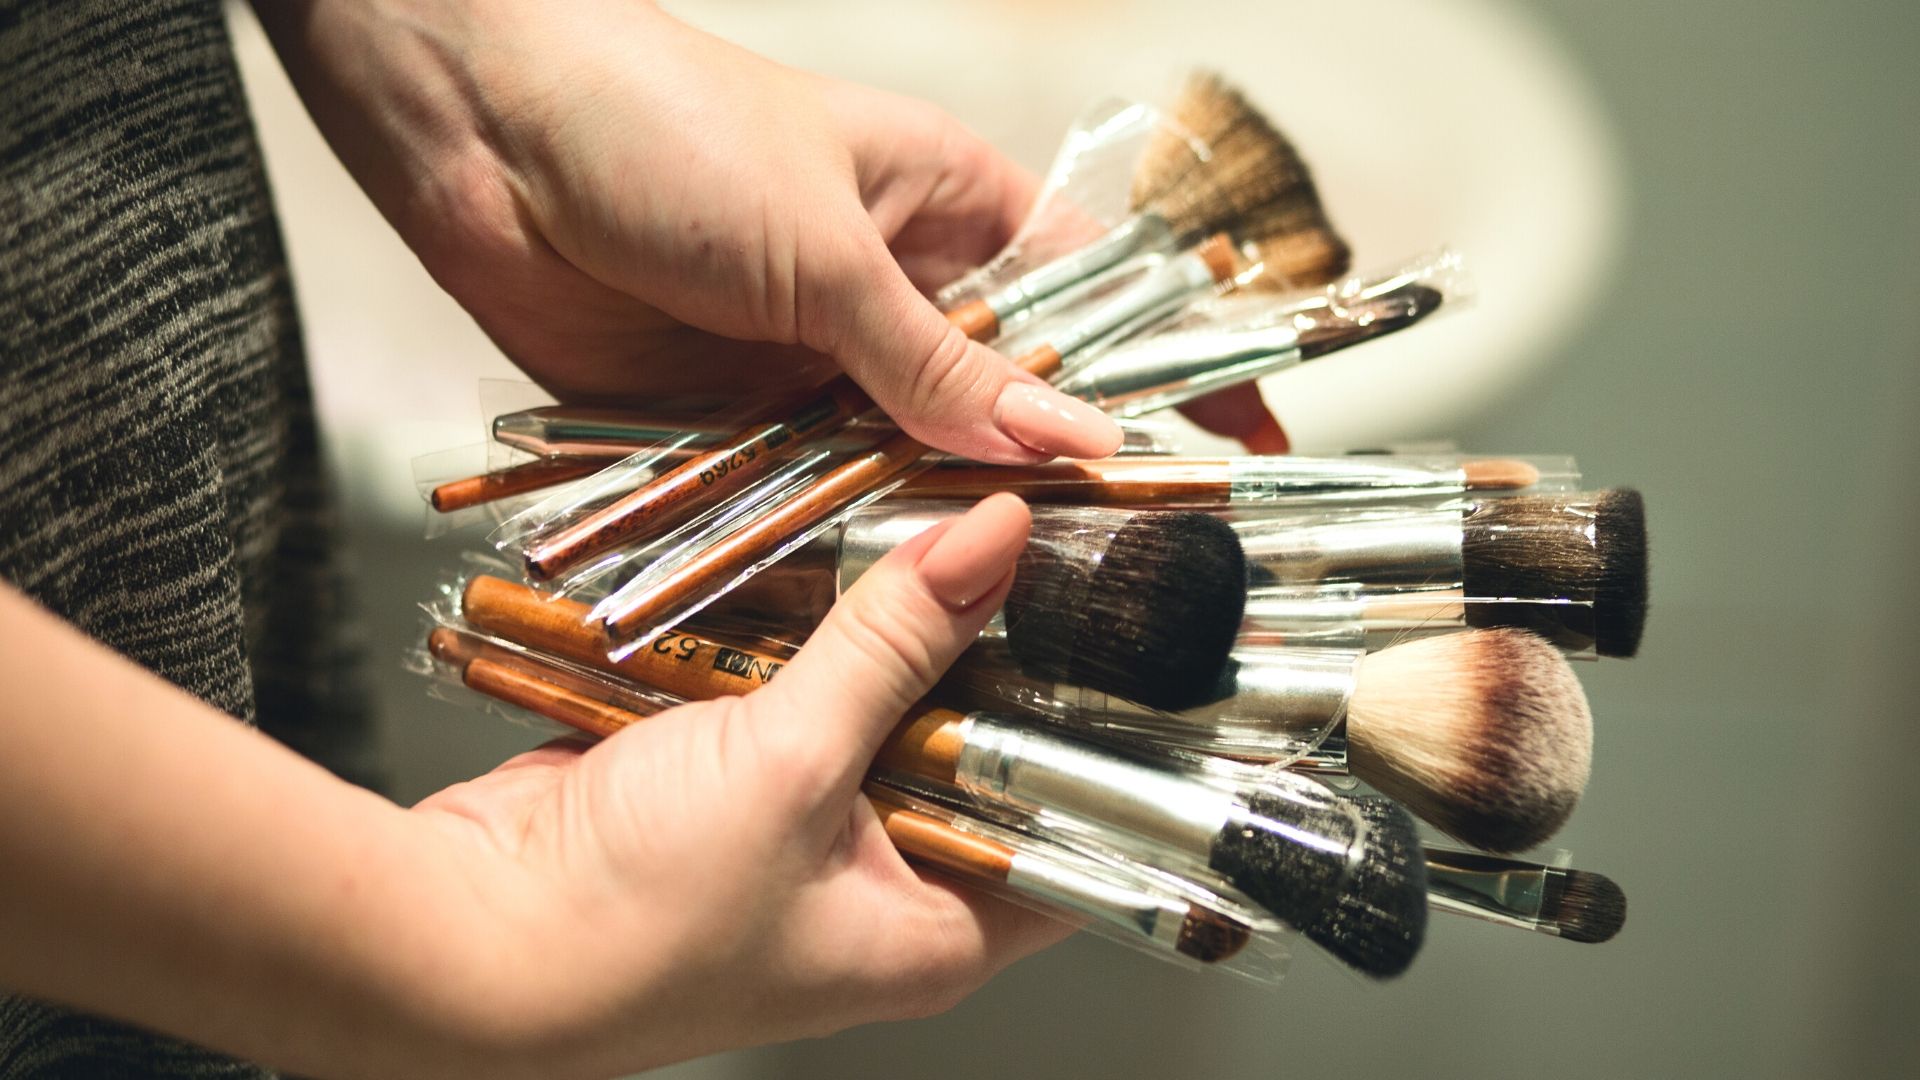 What to Clean Makeup Brushes With